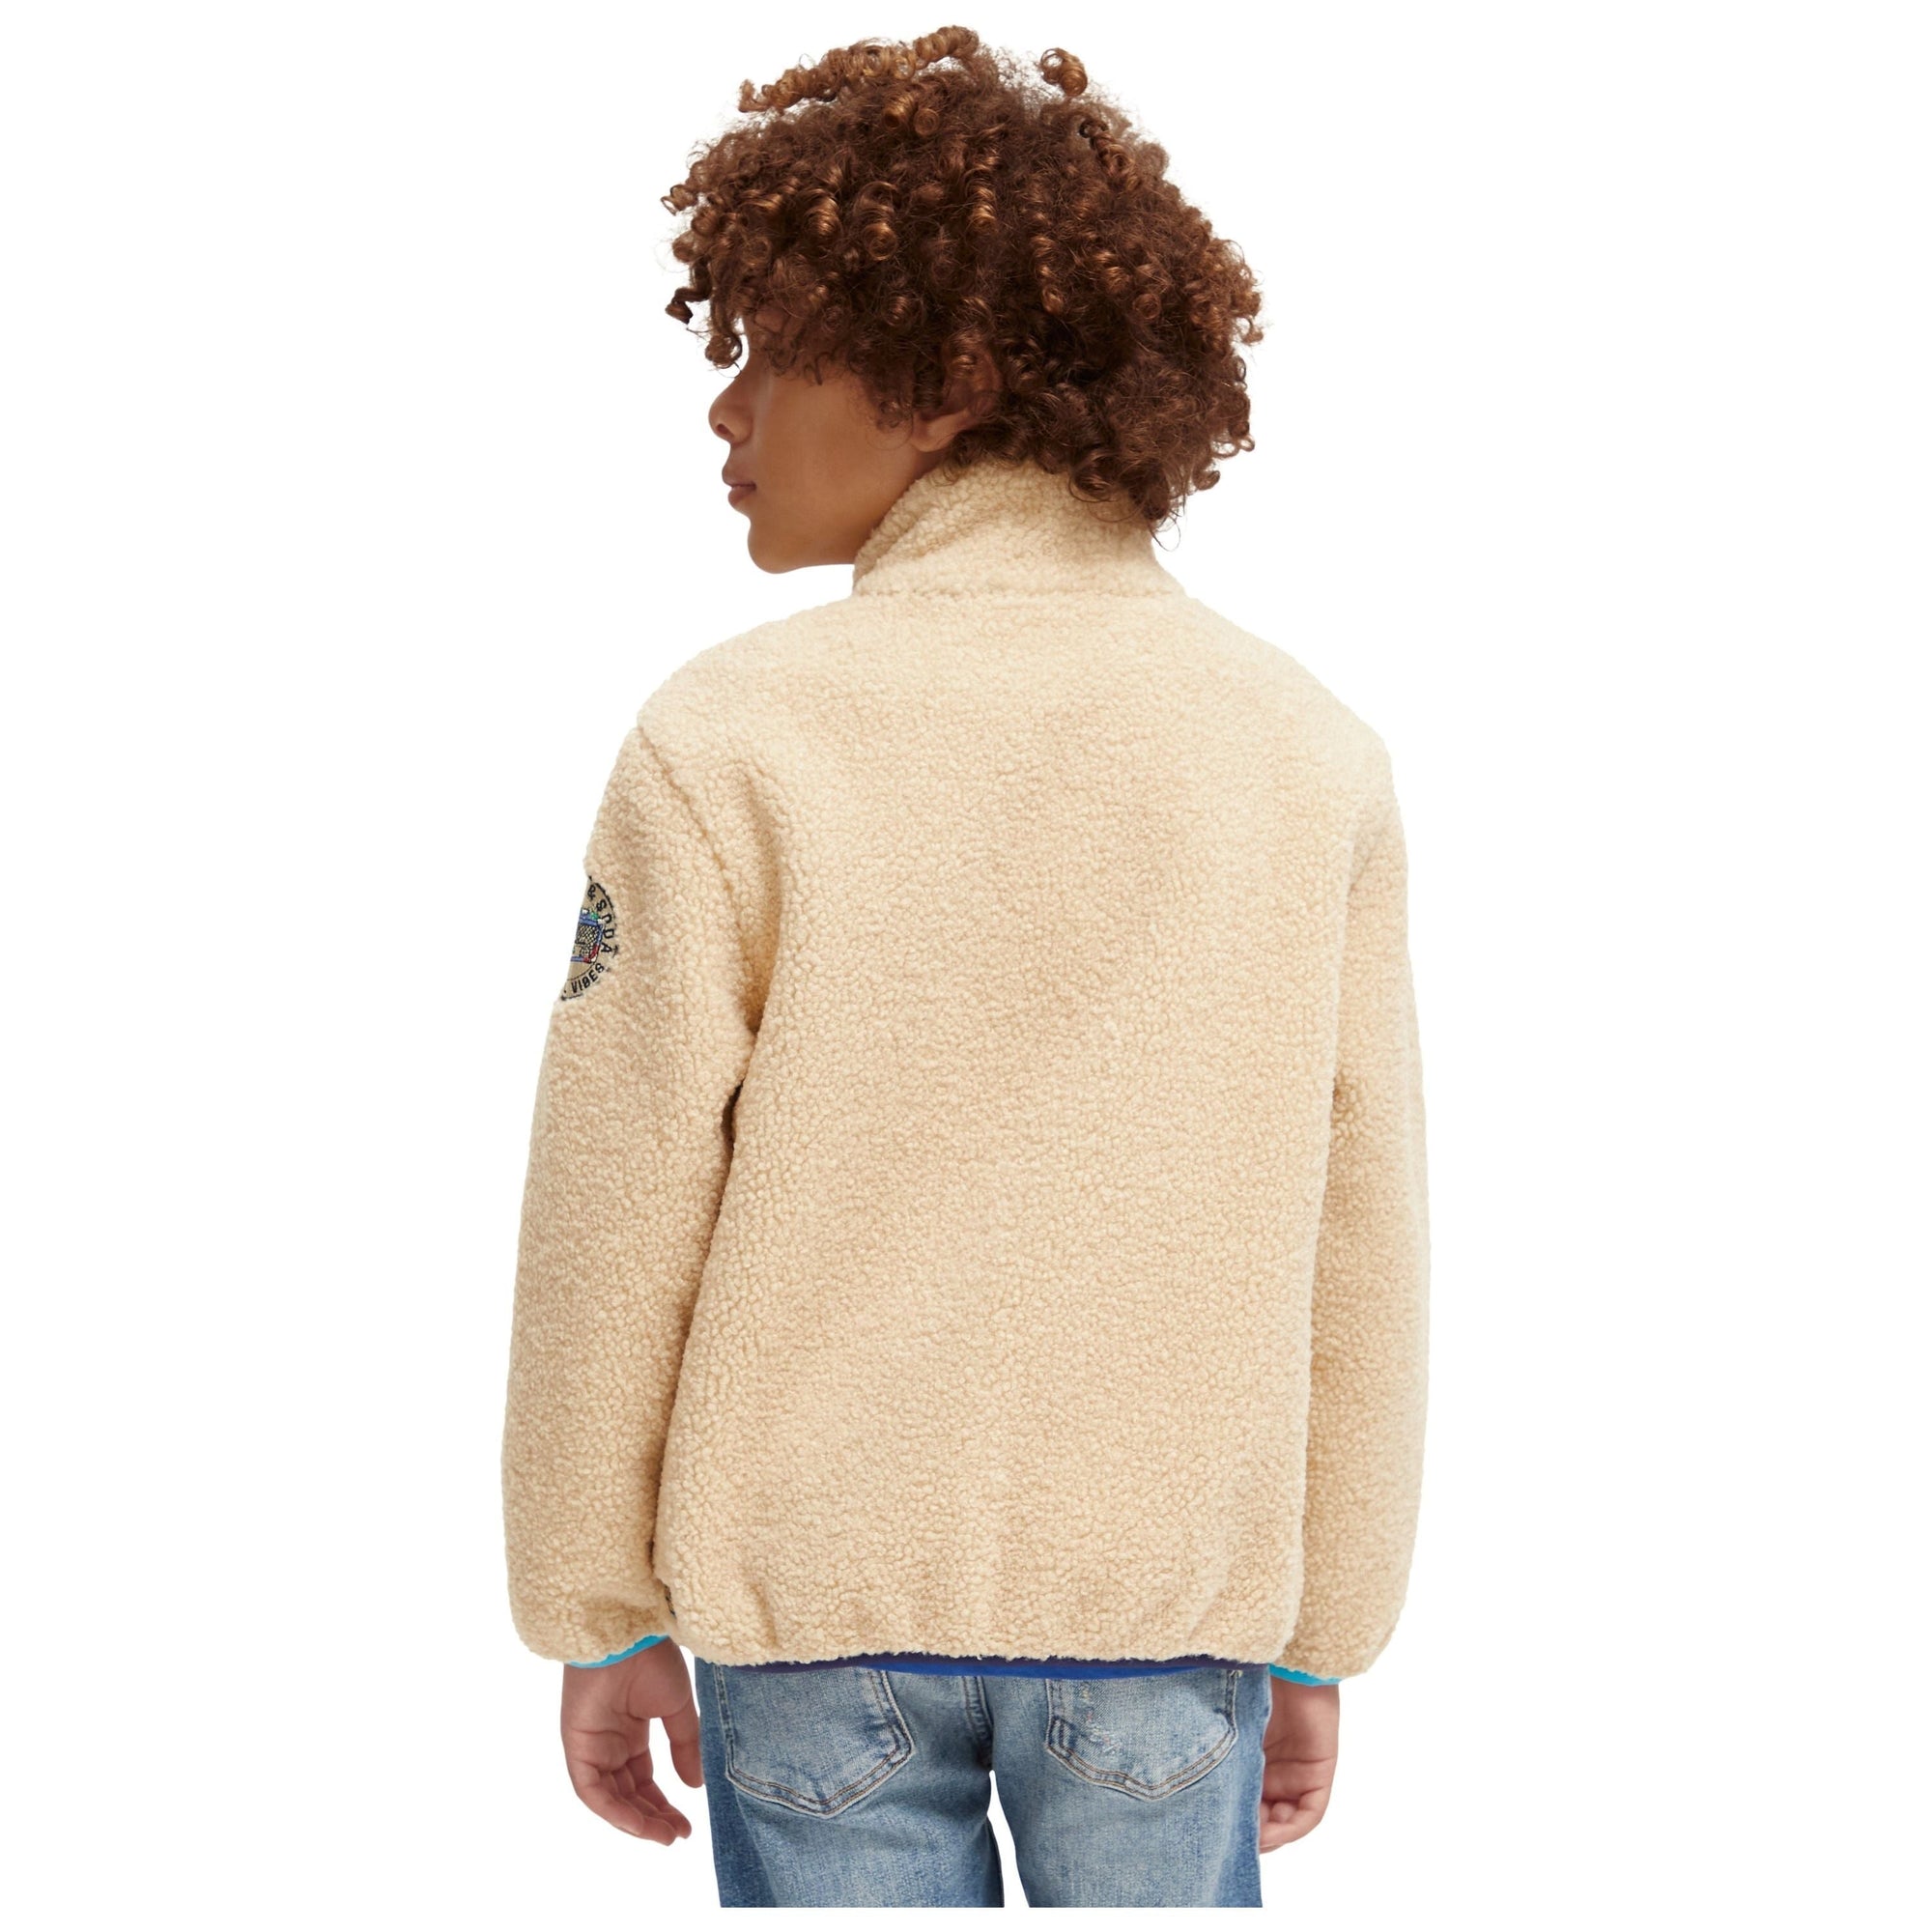 Contrast Pocketed Teddy Jacket